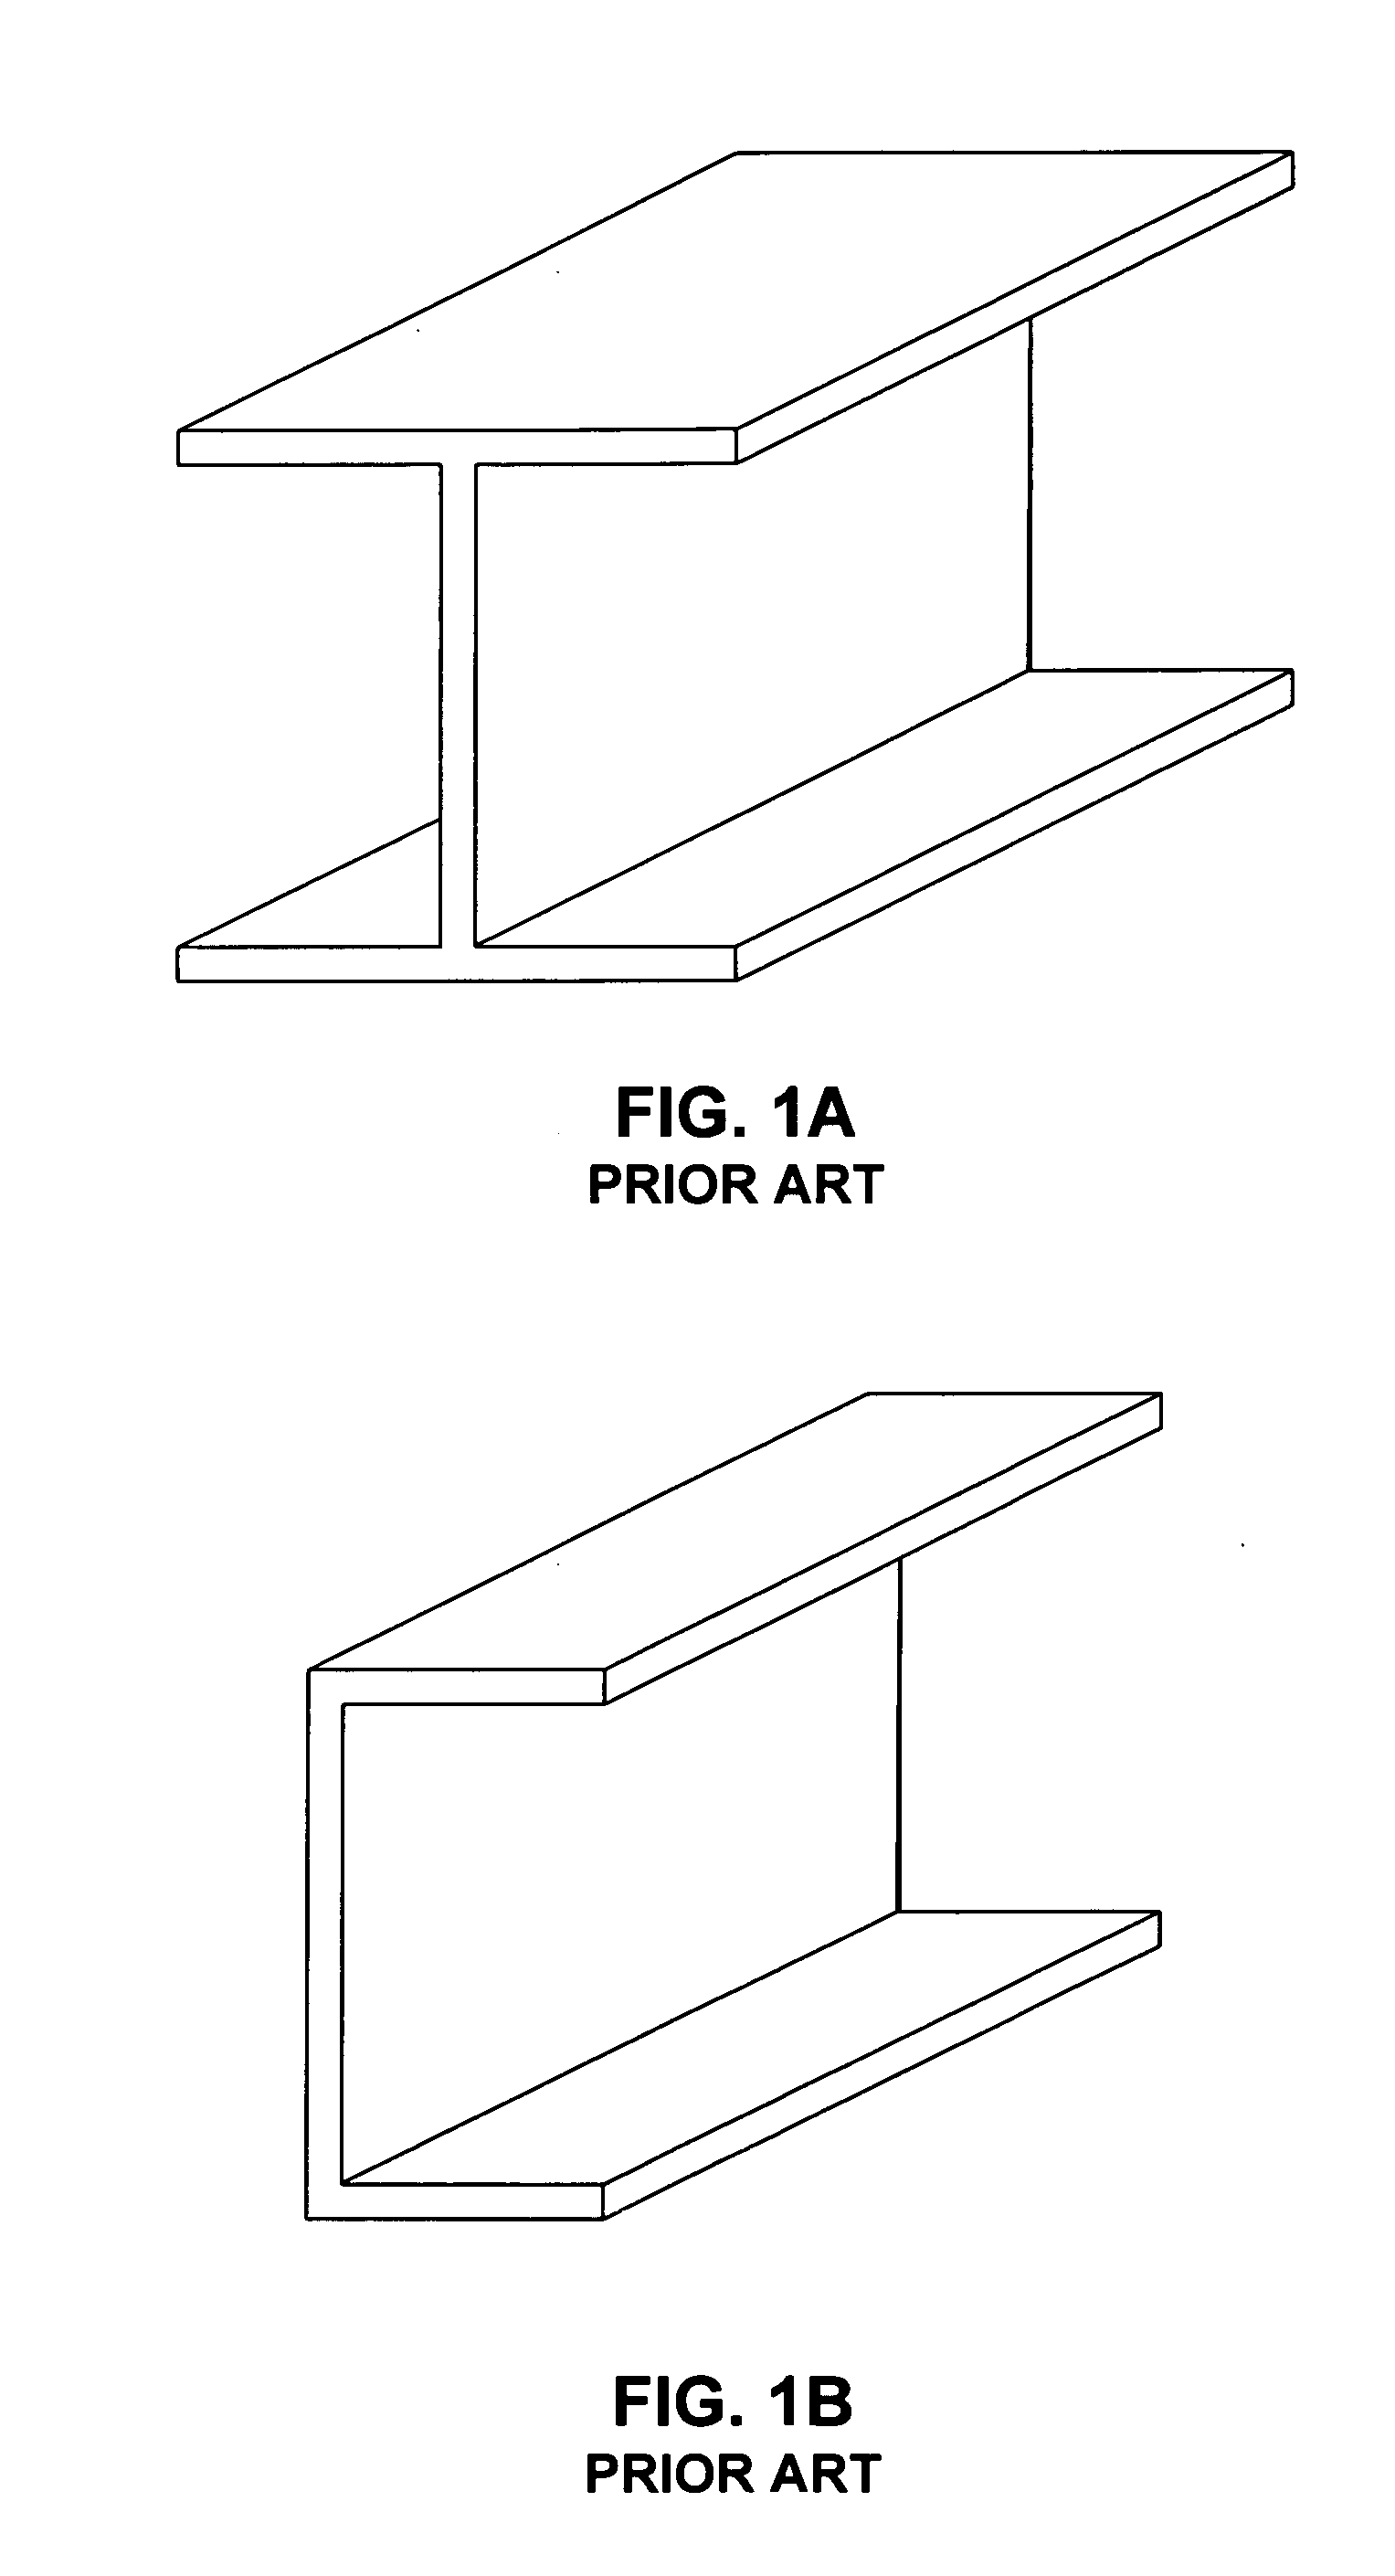 Friction stir welding process to join two or more members in forming a three-dimensional joint